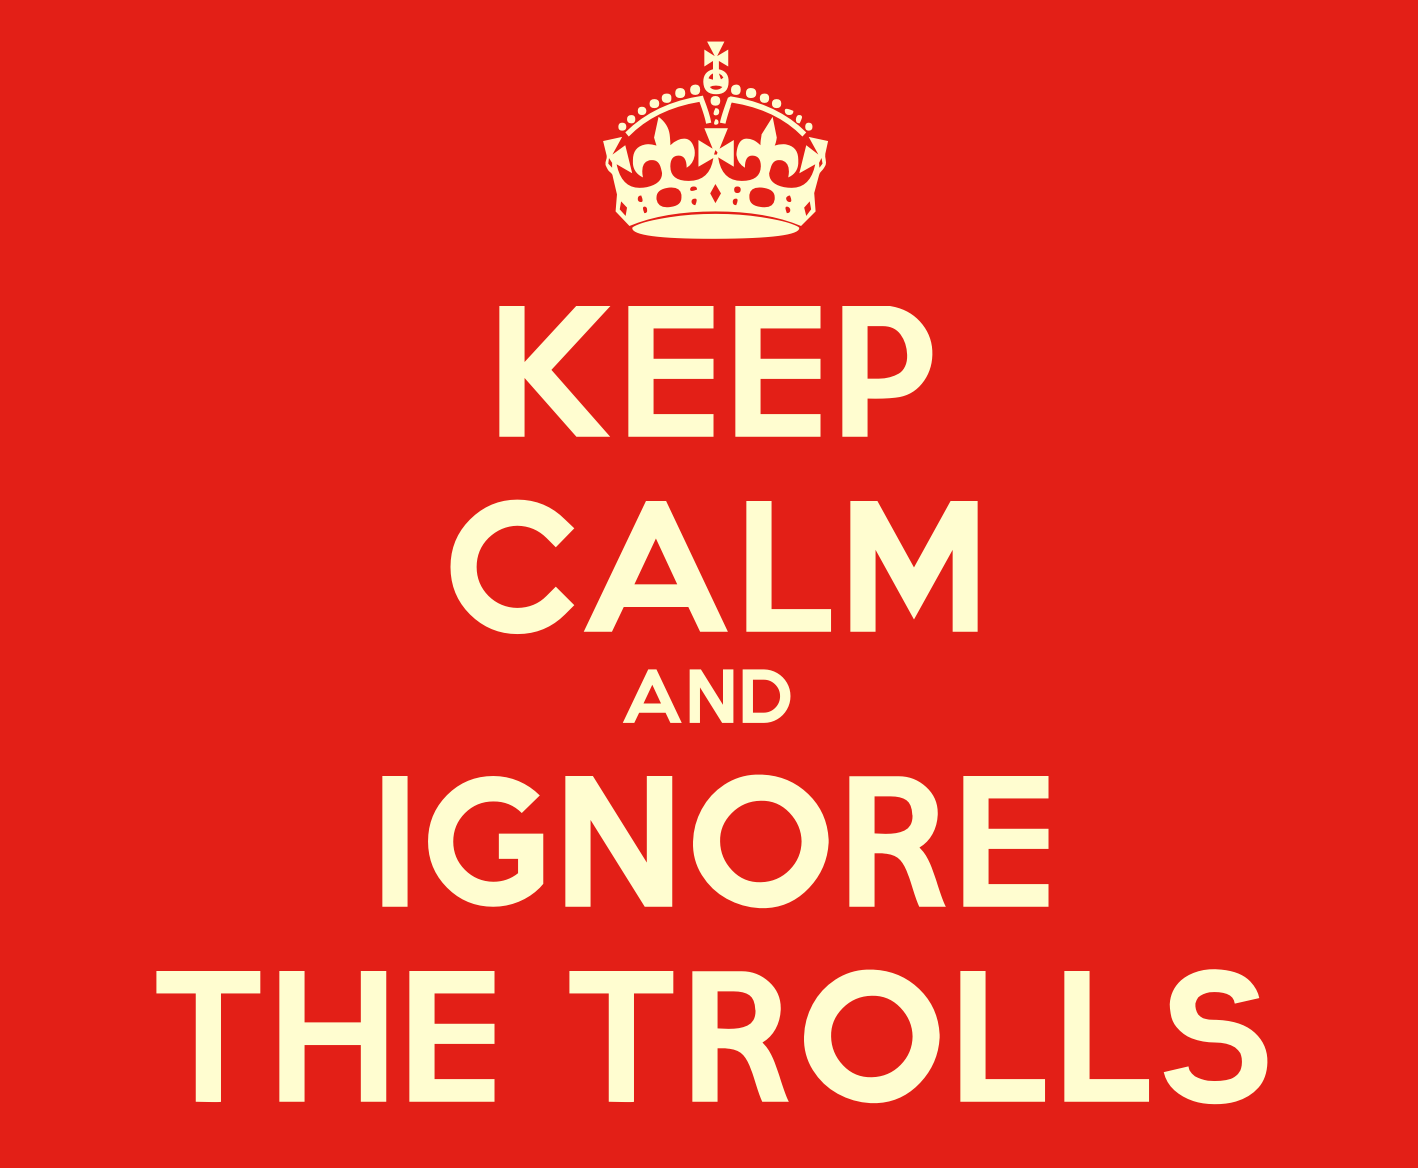 Keep calm and stop trolling